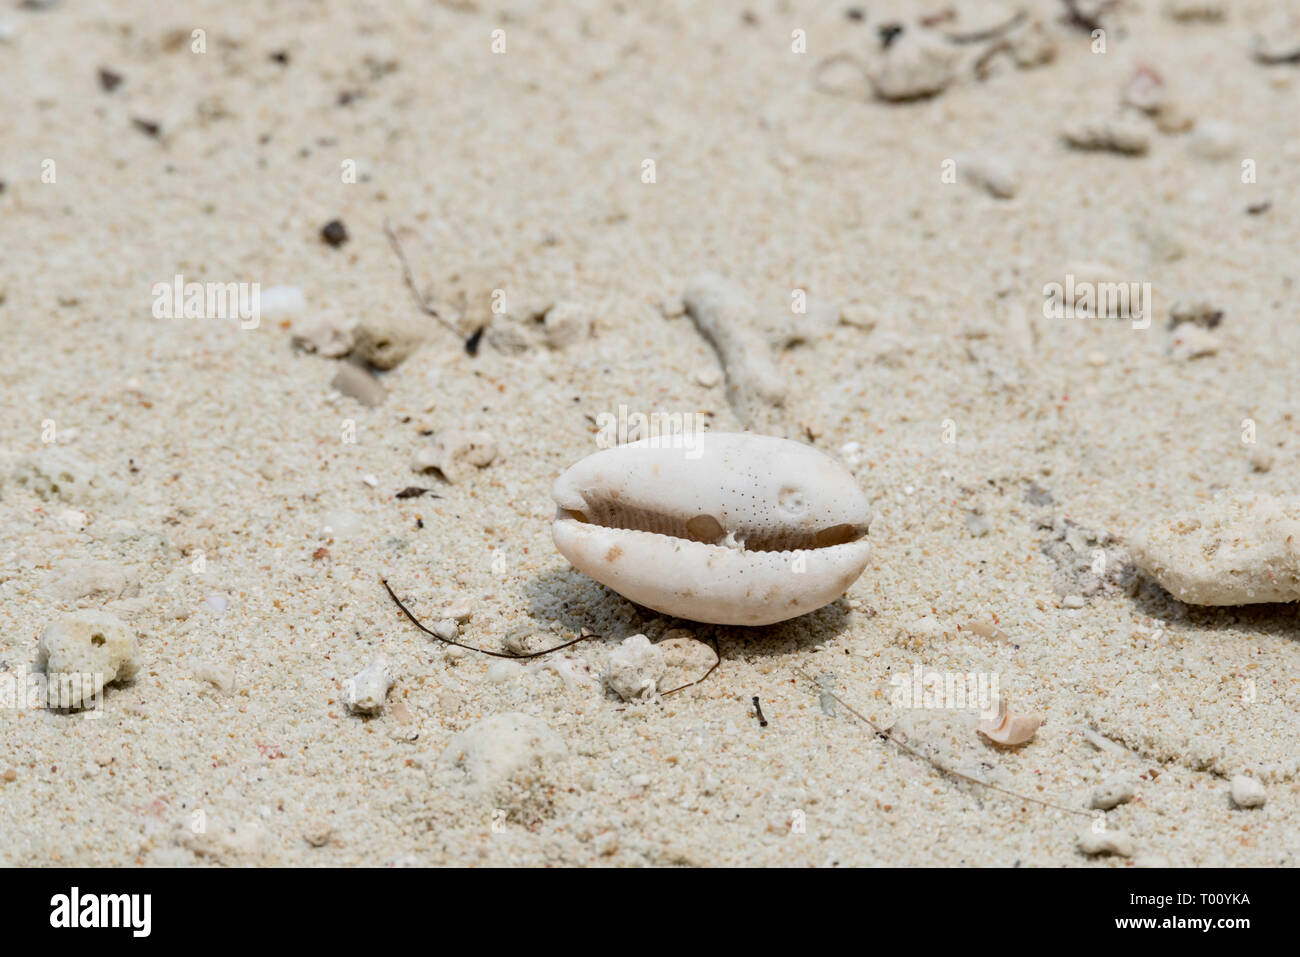 Pisang Island unidentified Cowrie shell 2 Stock Photo